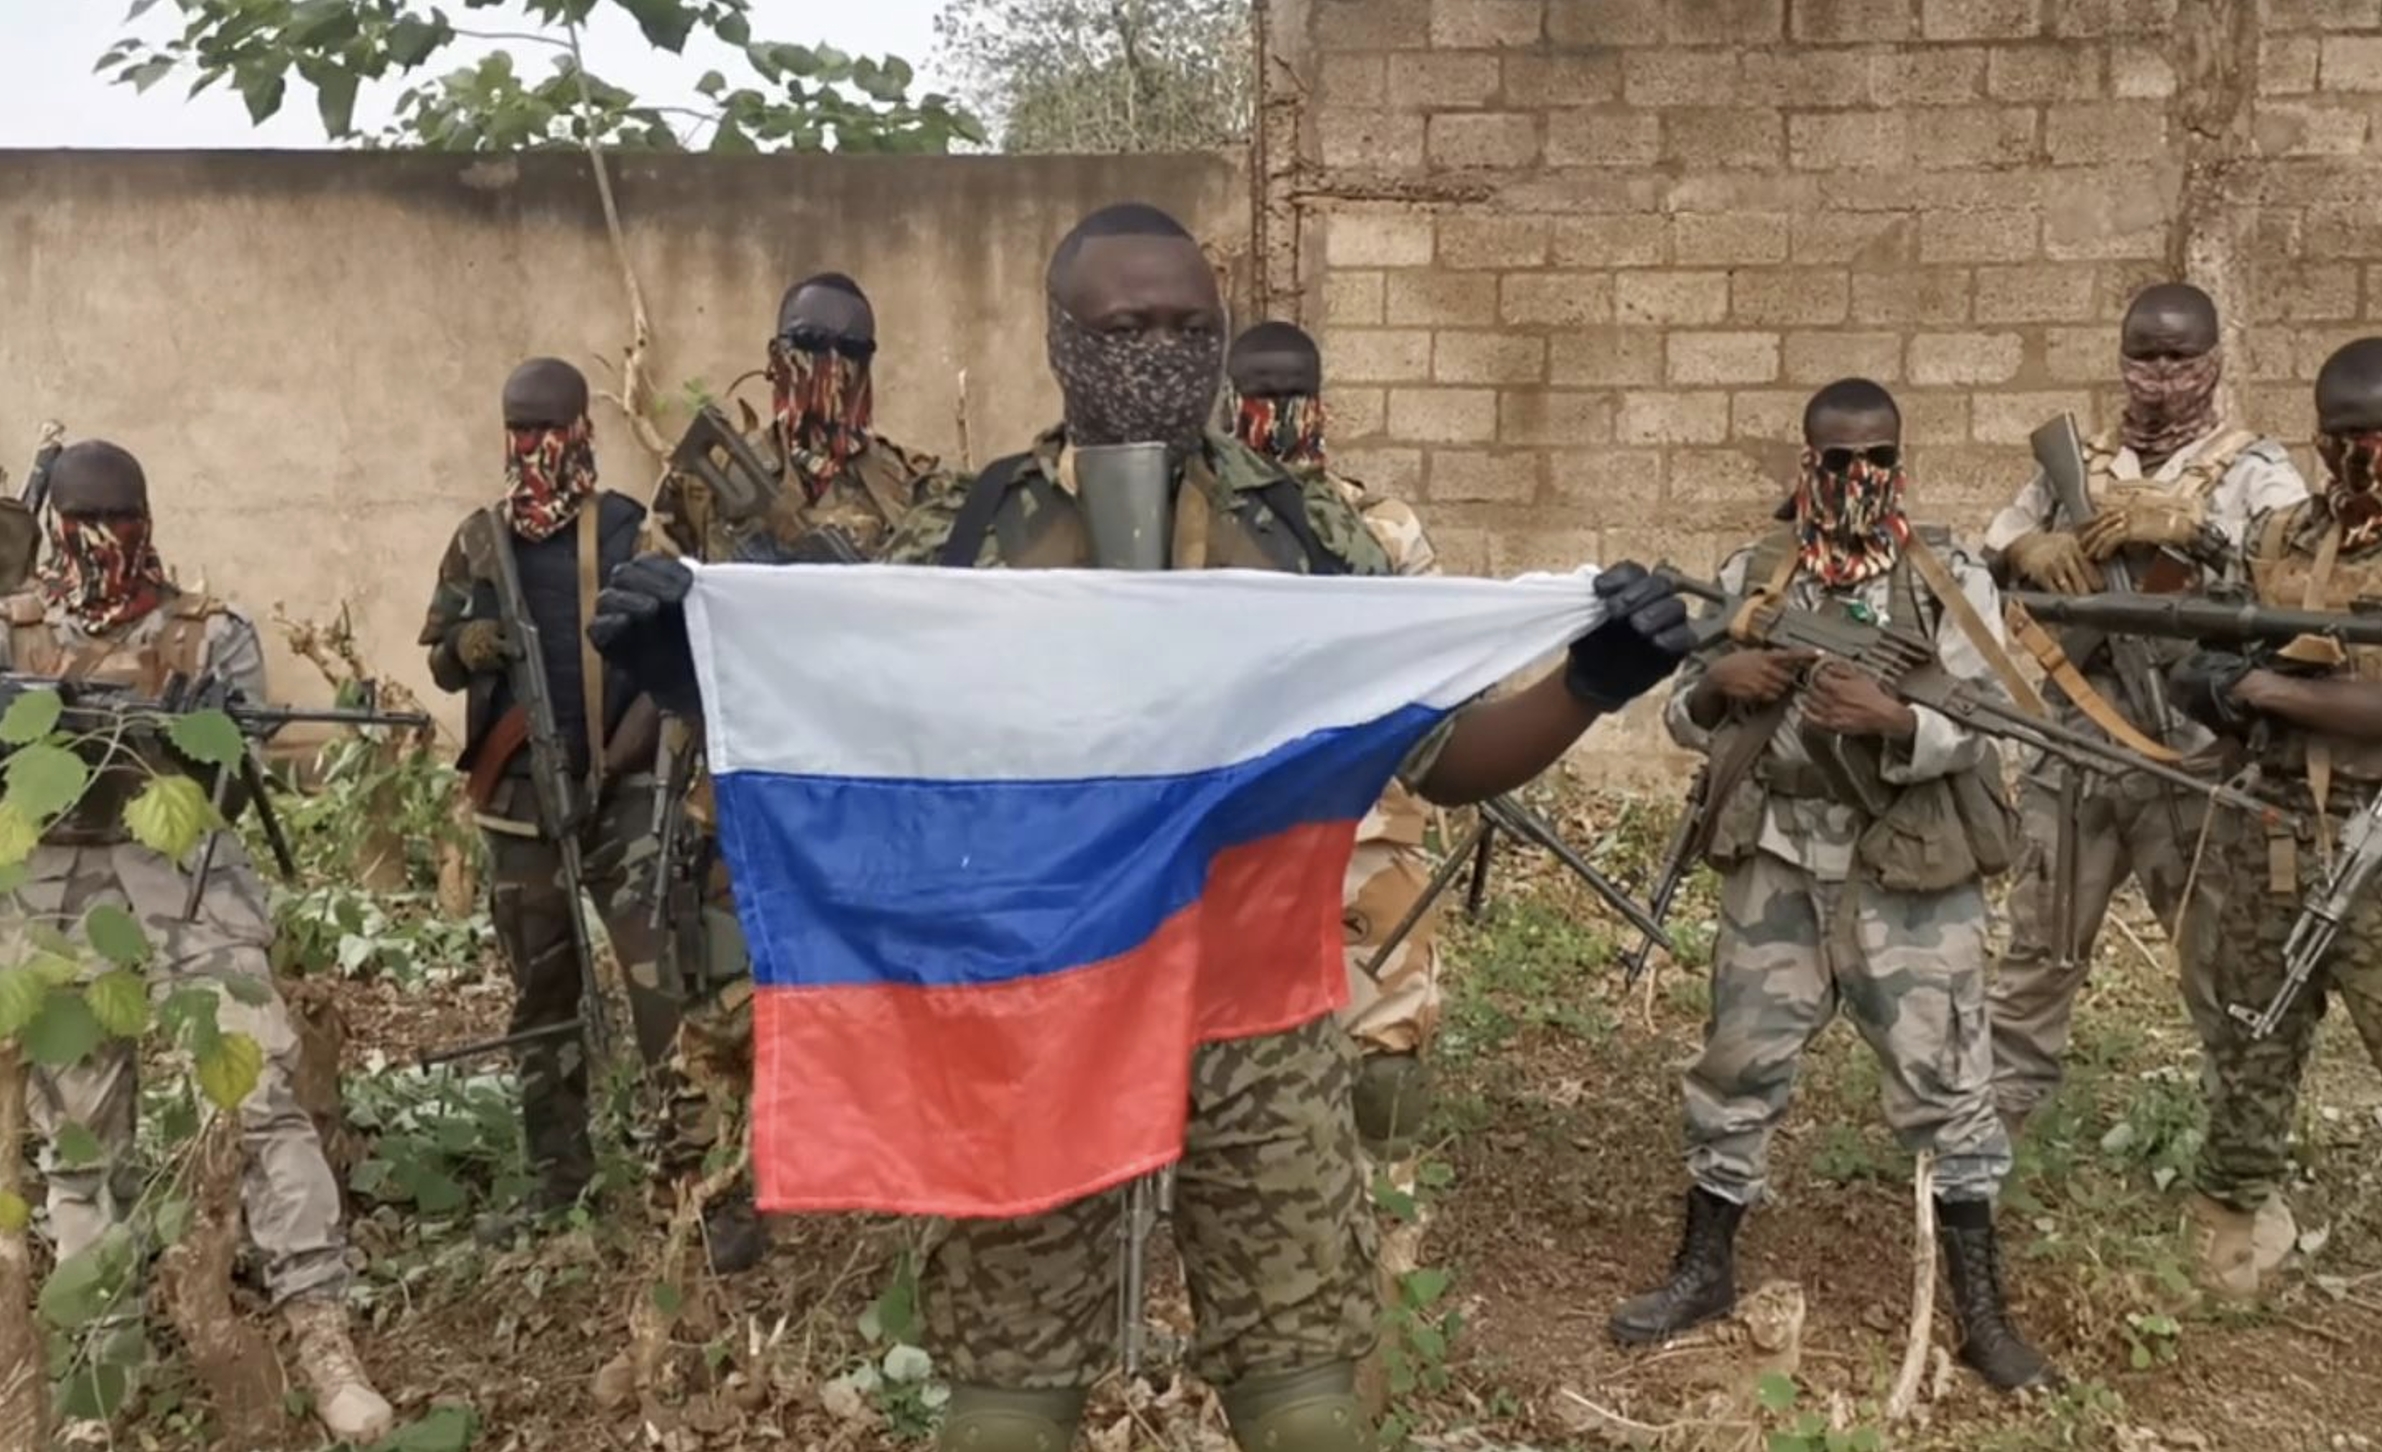 The Central African military want to fight alongside the Russians in Ukraine against the Nazis